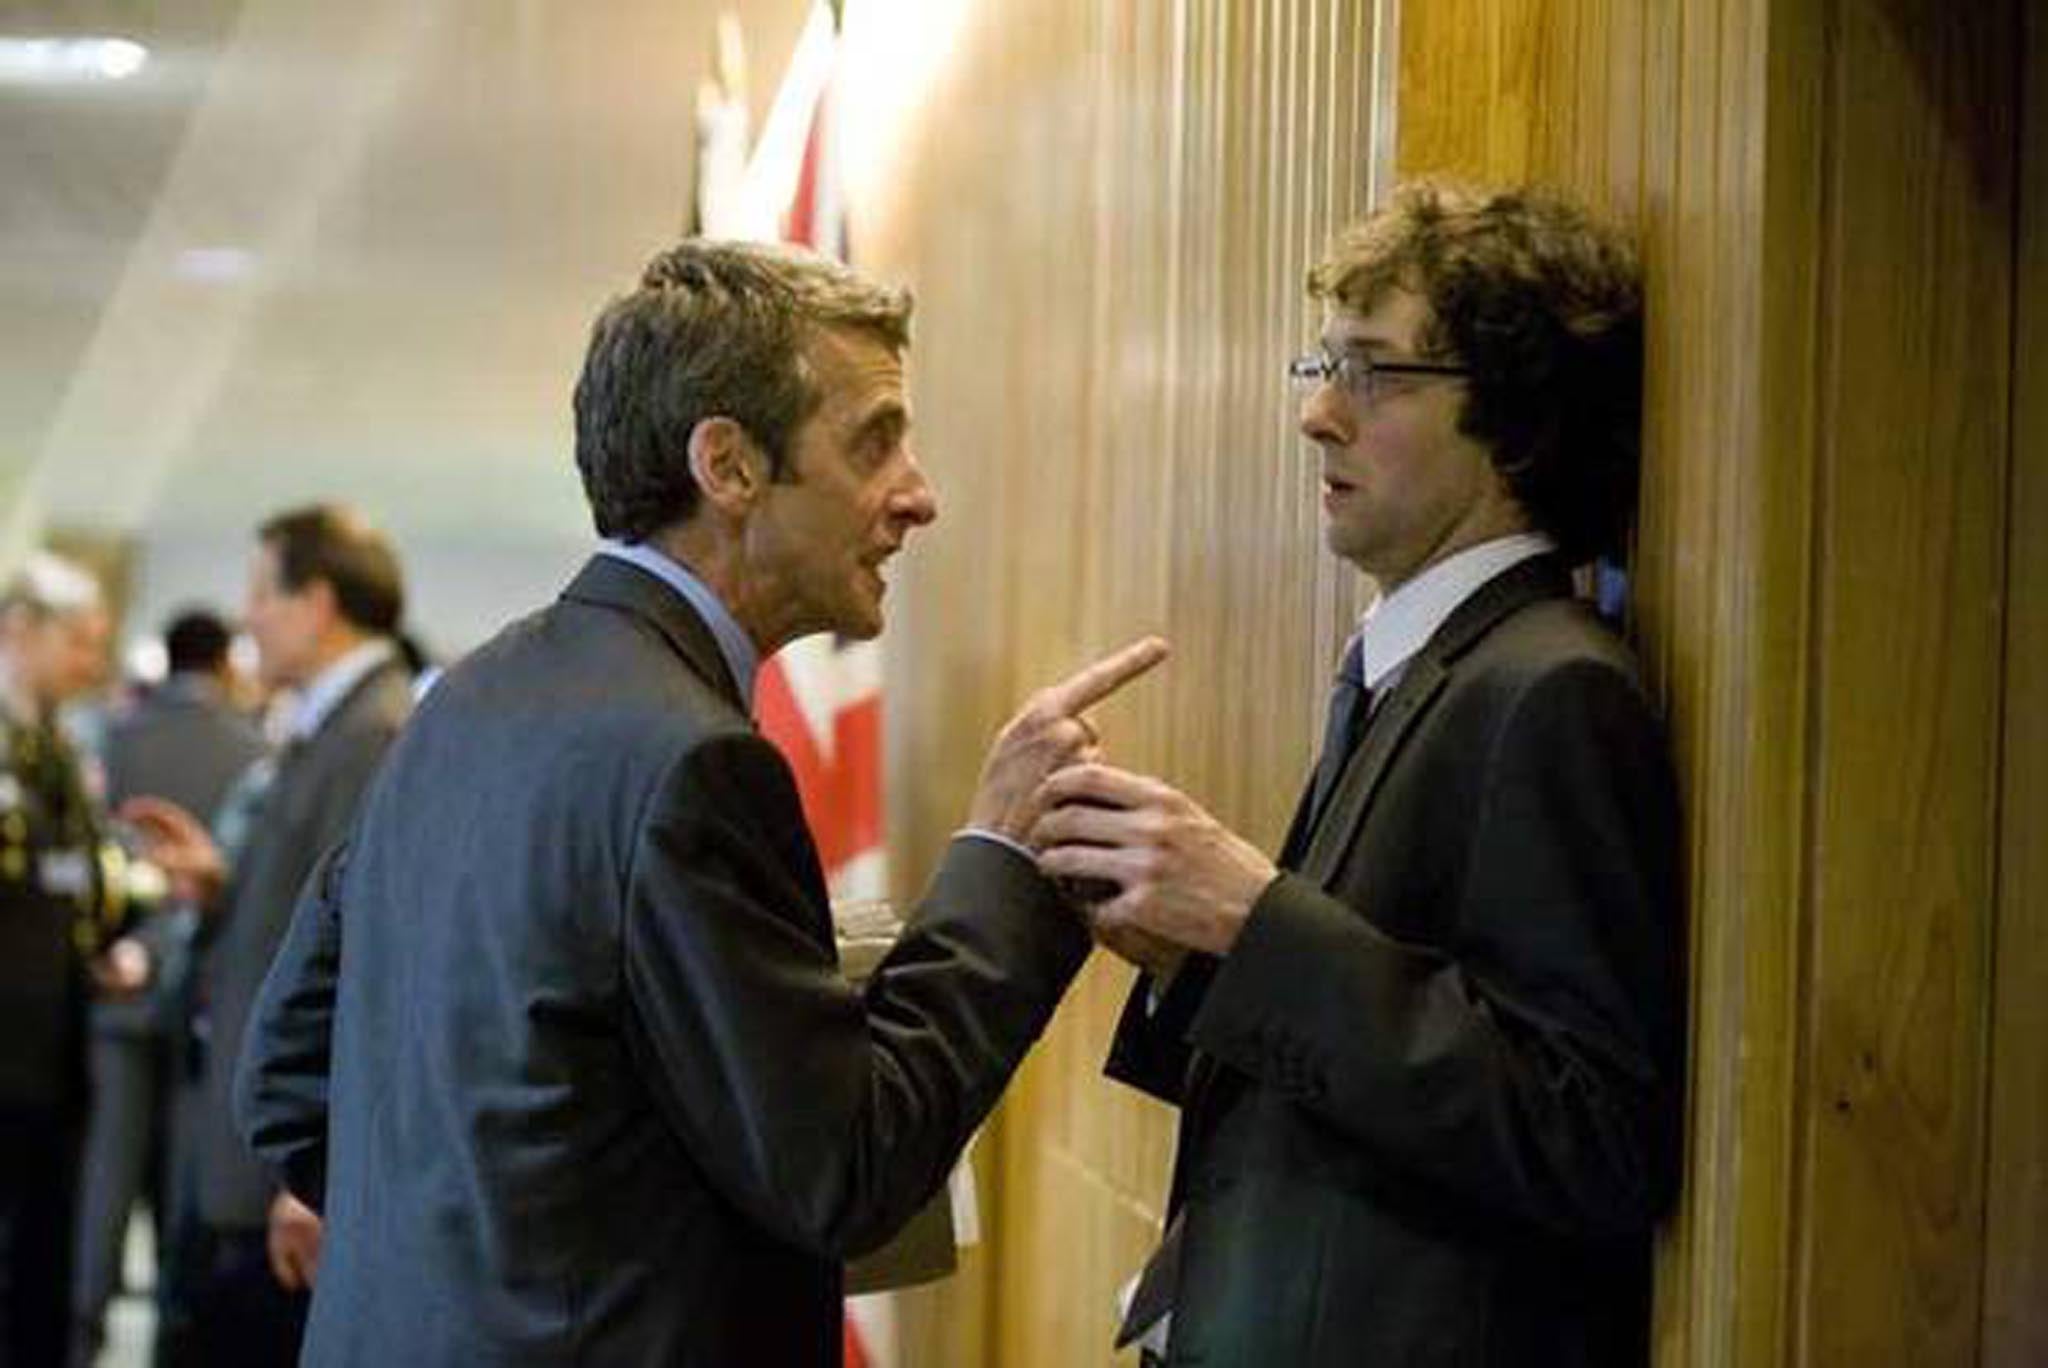 Peter Capaldi and Chris Addison star in political comedy The Thick of IT